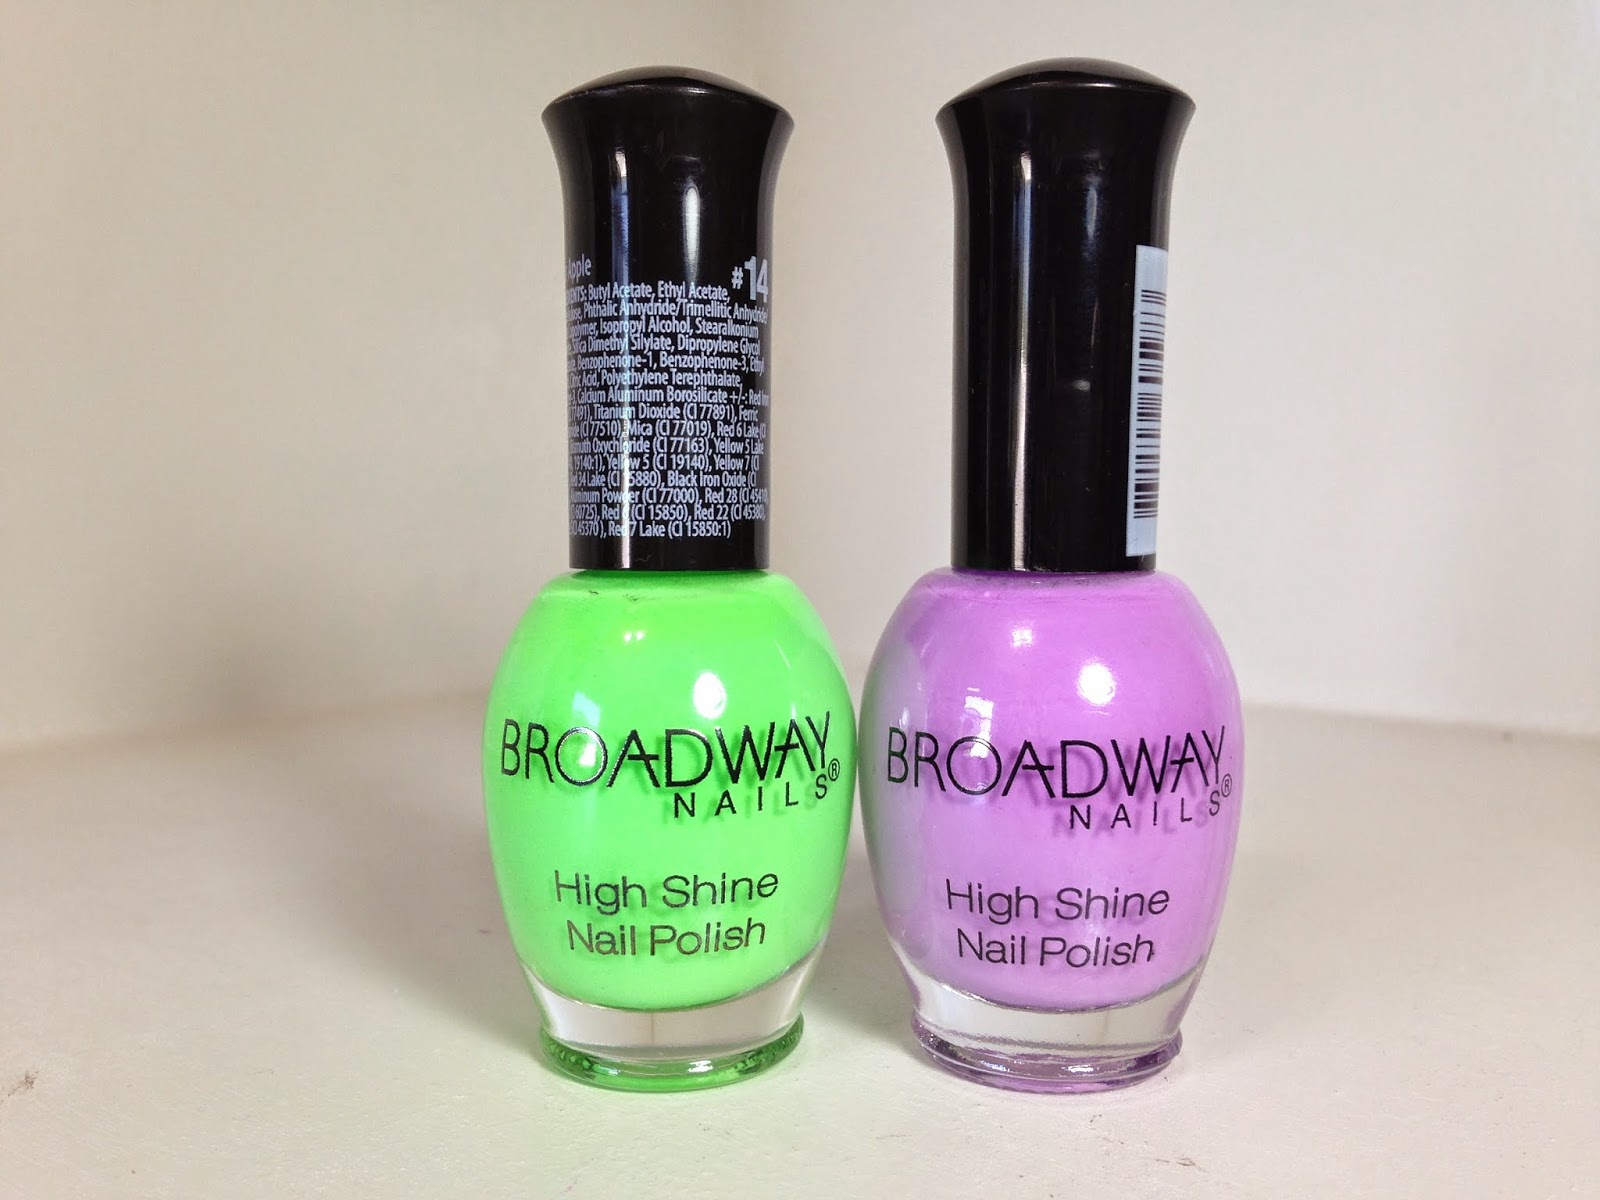 2. Broadway Nails Quick Dry Nail Polish in Color 40 - wide 5